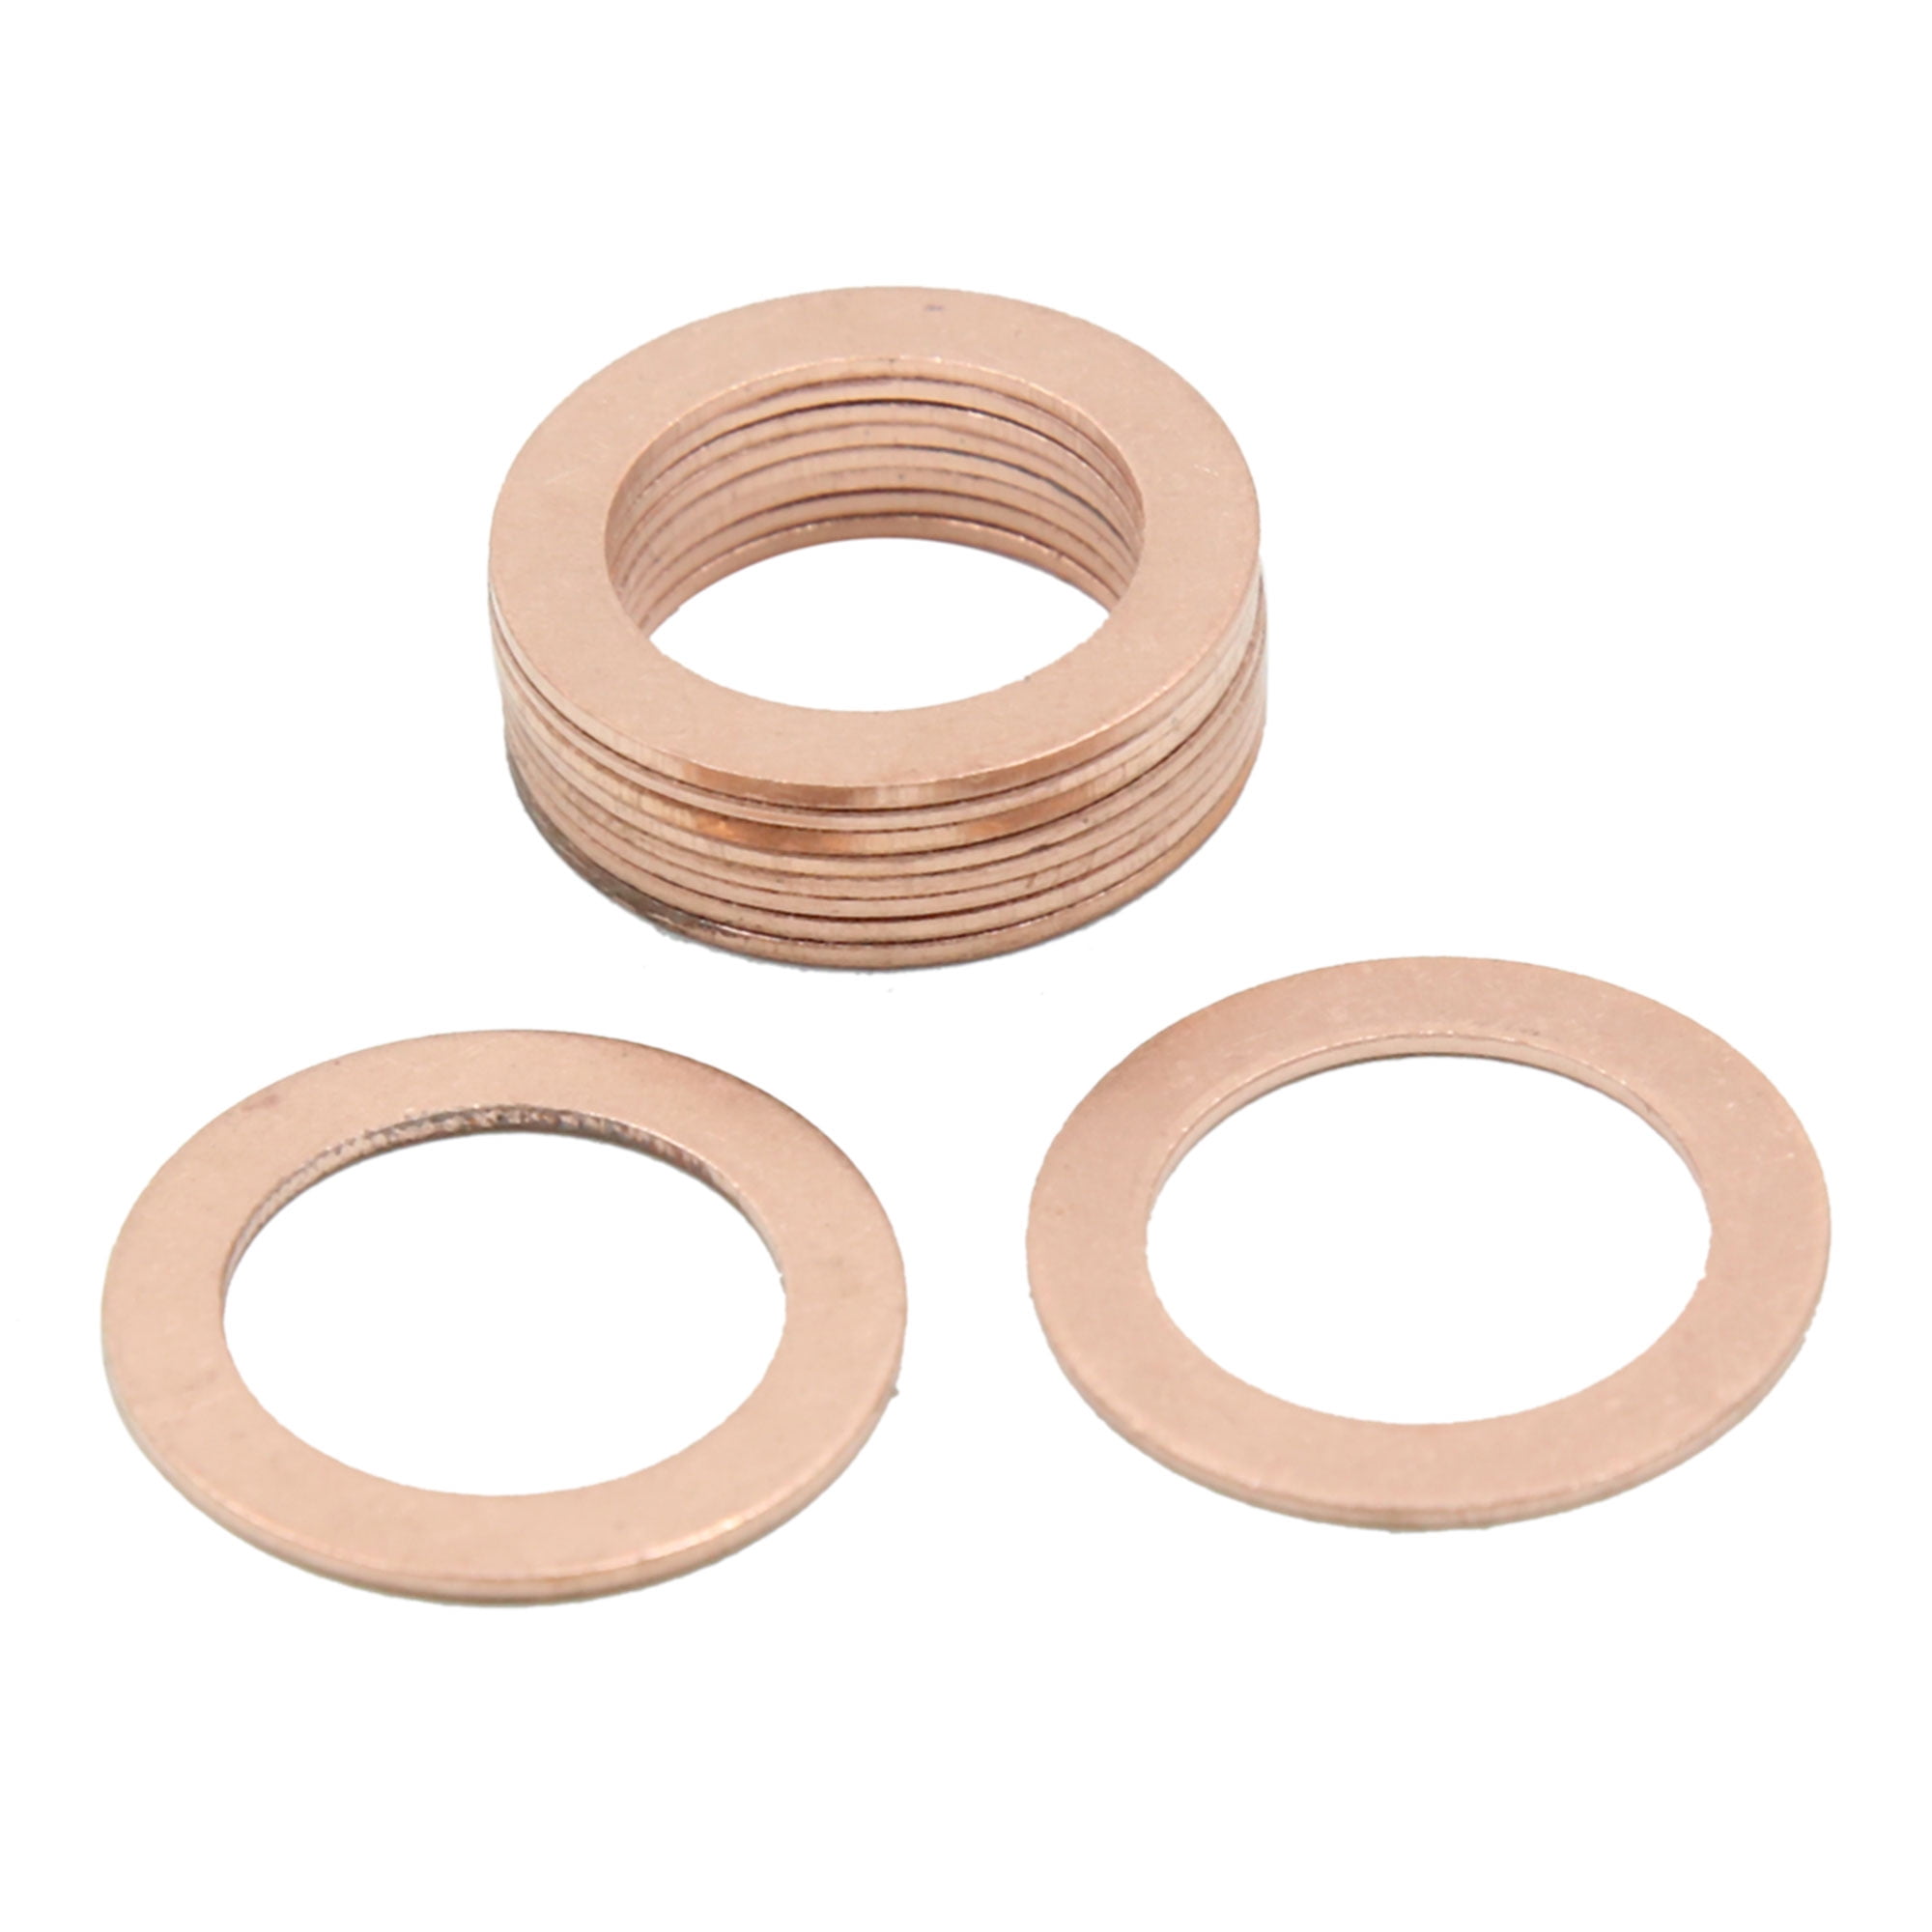 PACK OFF 20 20MM X 26MM X 1.5MM COPPER SEALING WASHER FLAT SEAL M20 